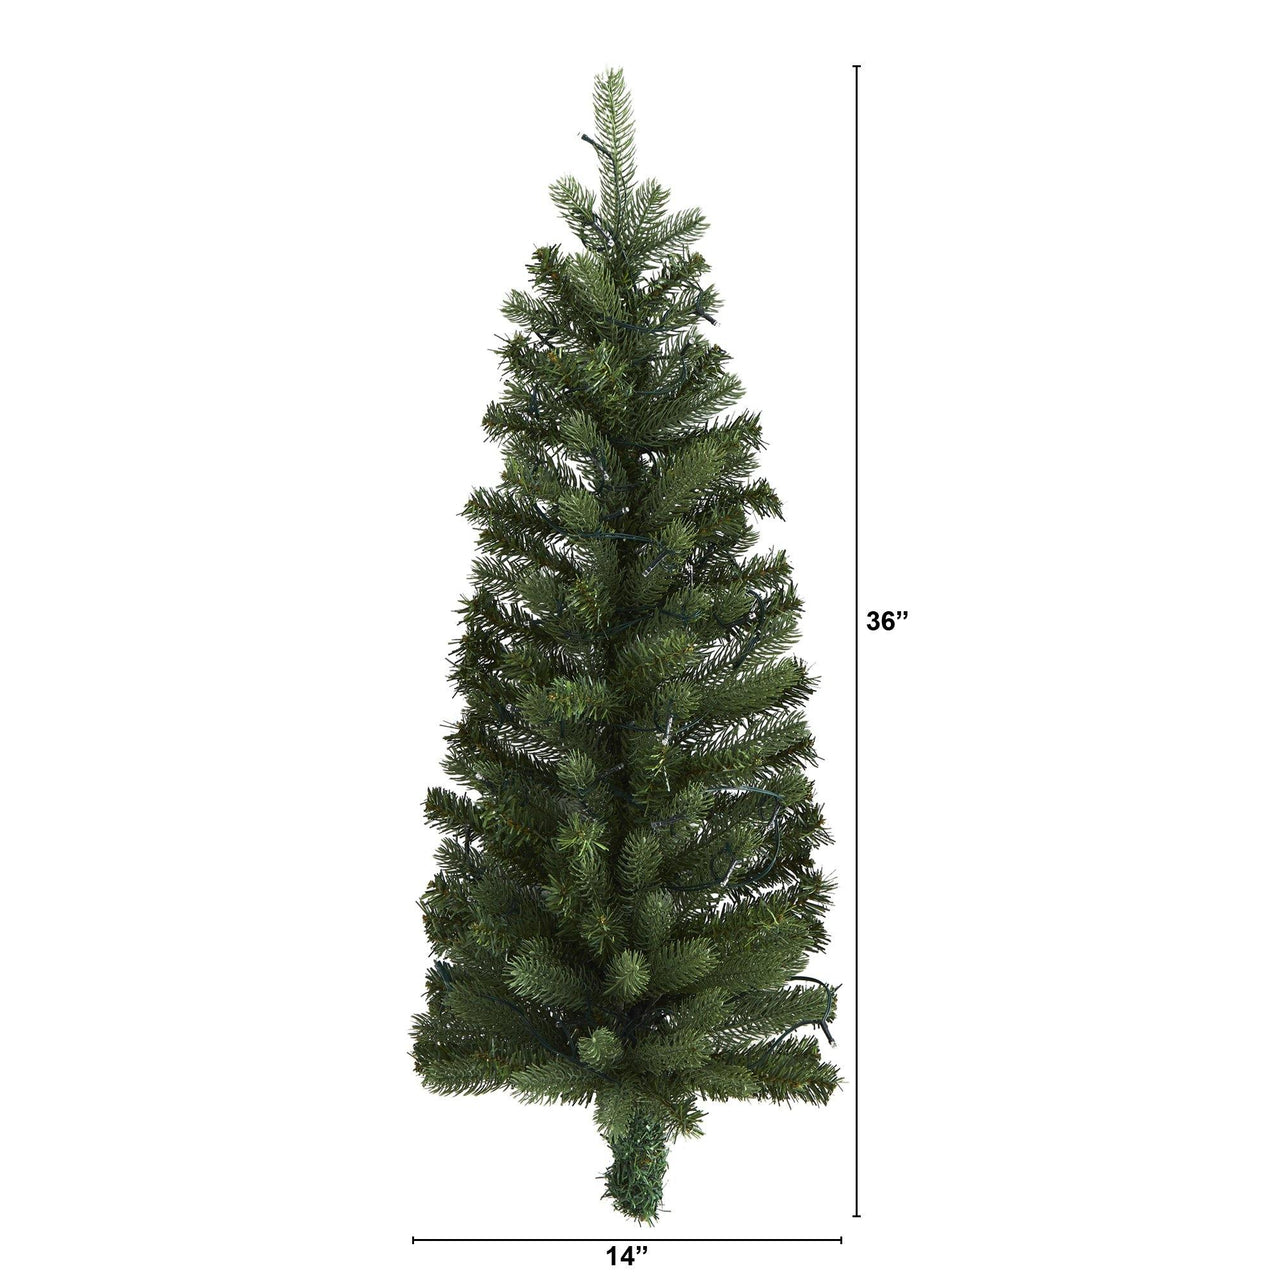 3' Flat Back Wall Hanging Artificial Christmas Tree with 35 Clear LED Lights - The Fox Decor